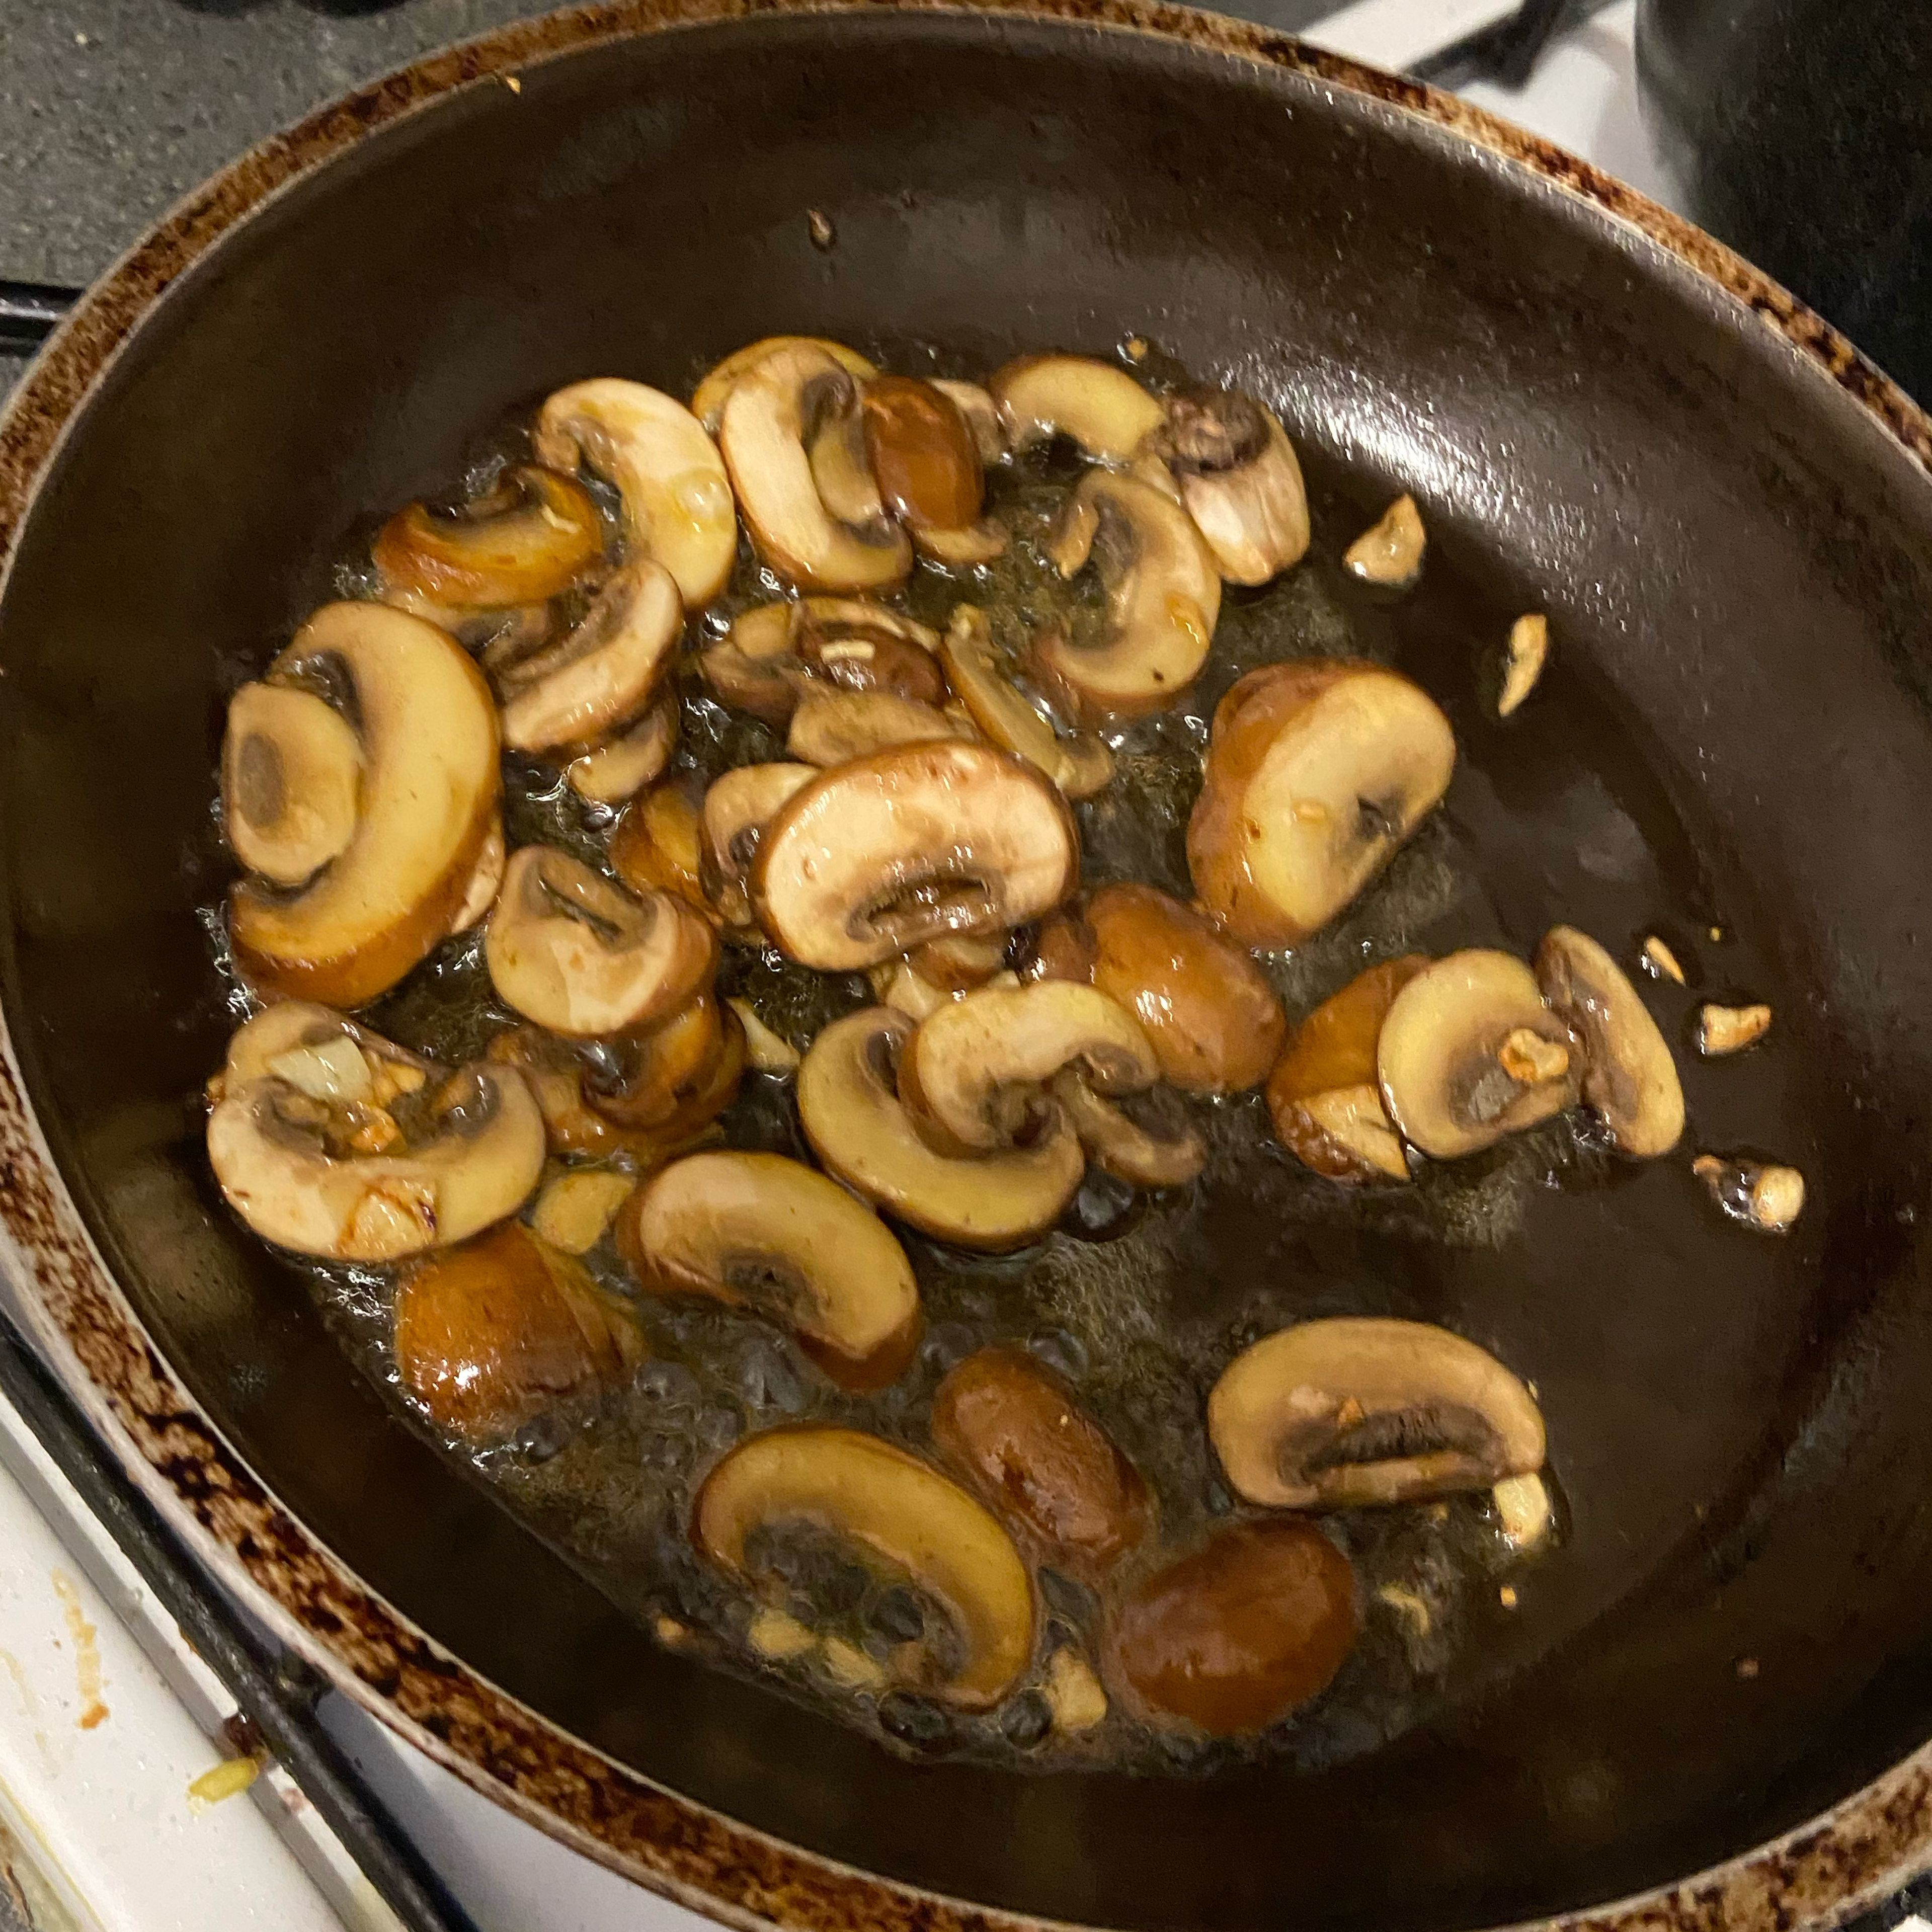 Fry the mushrooms and garlic until brown while adding a pinch of salt and pepper.